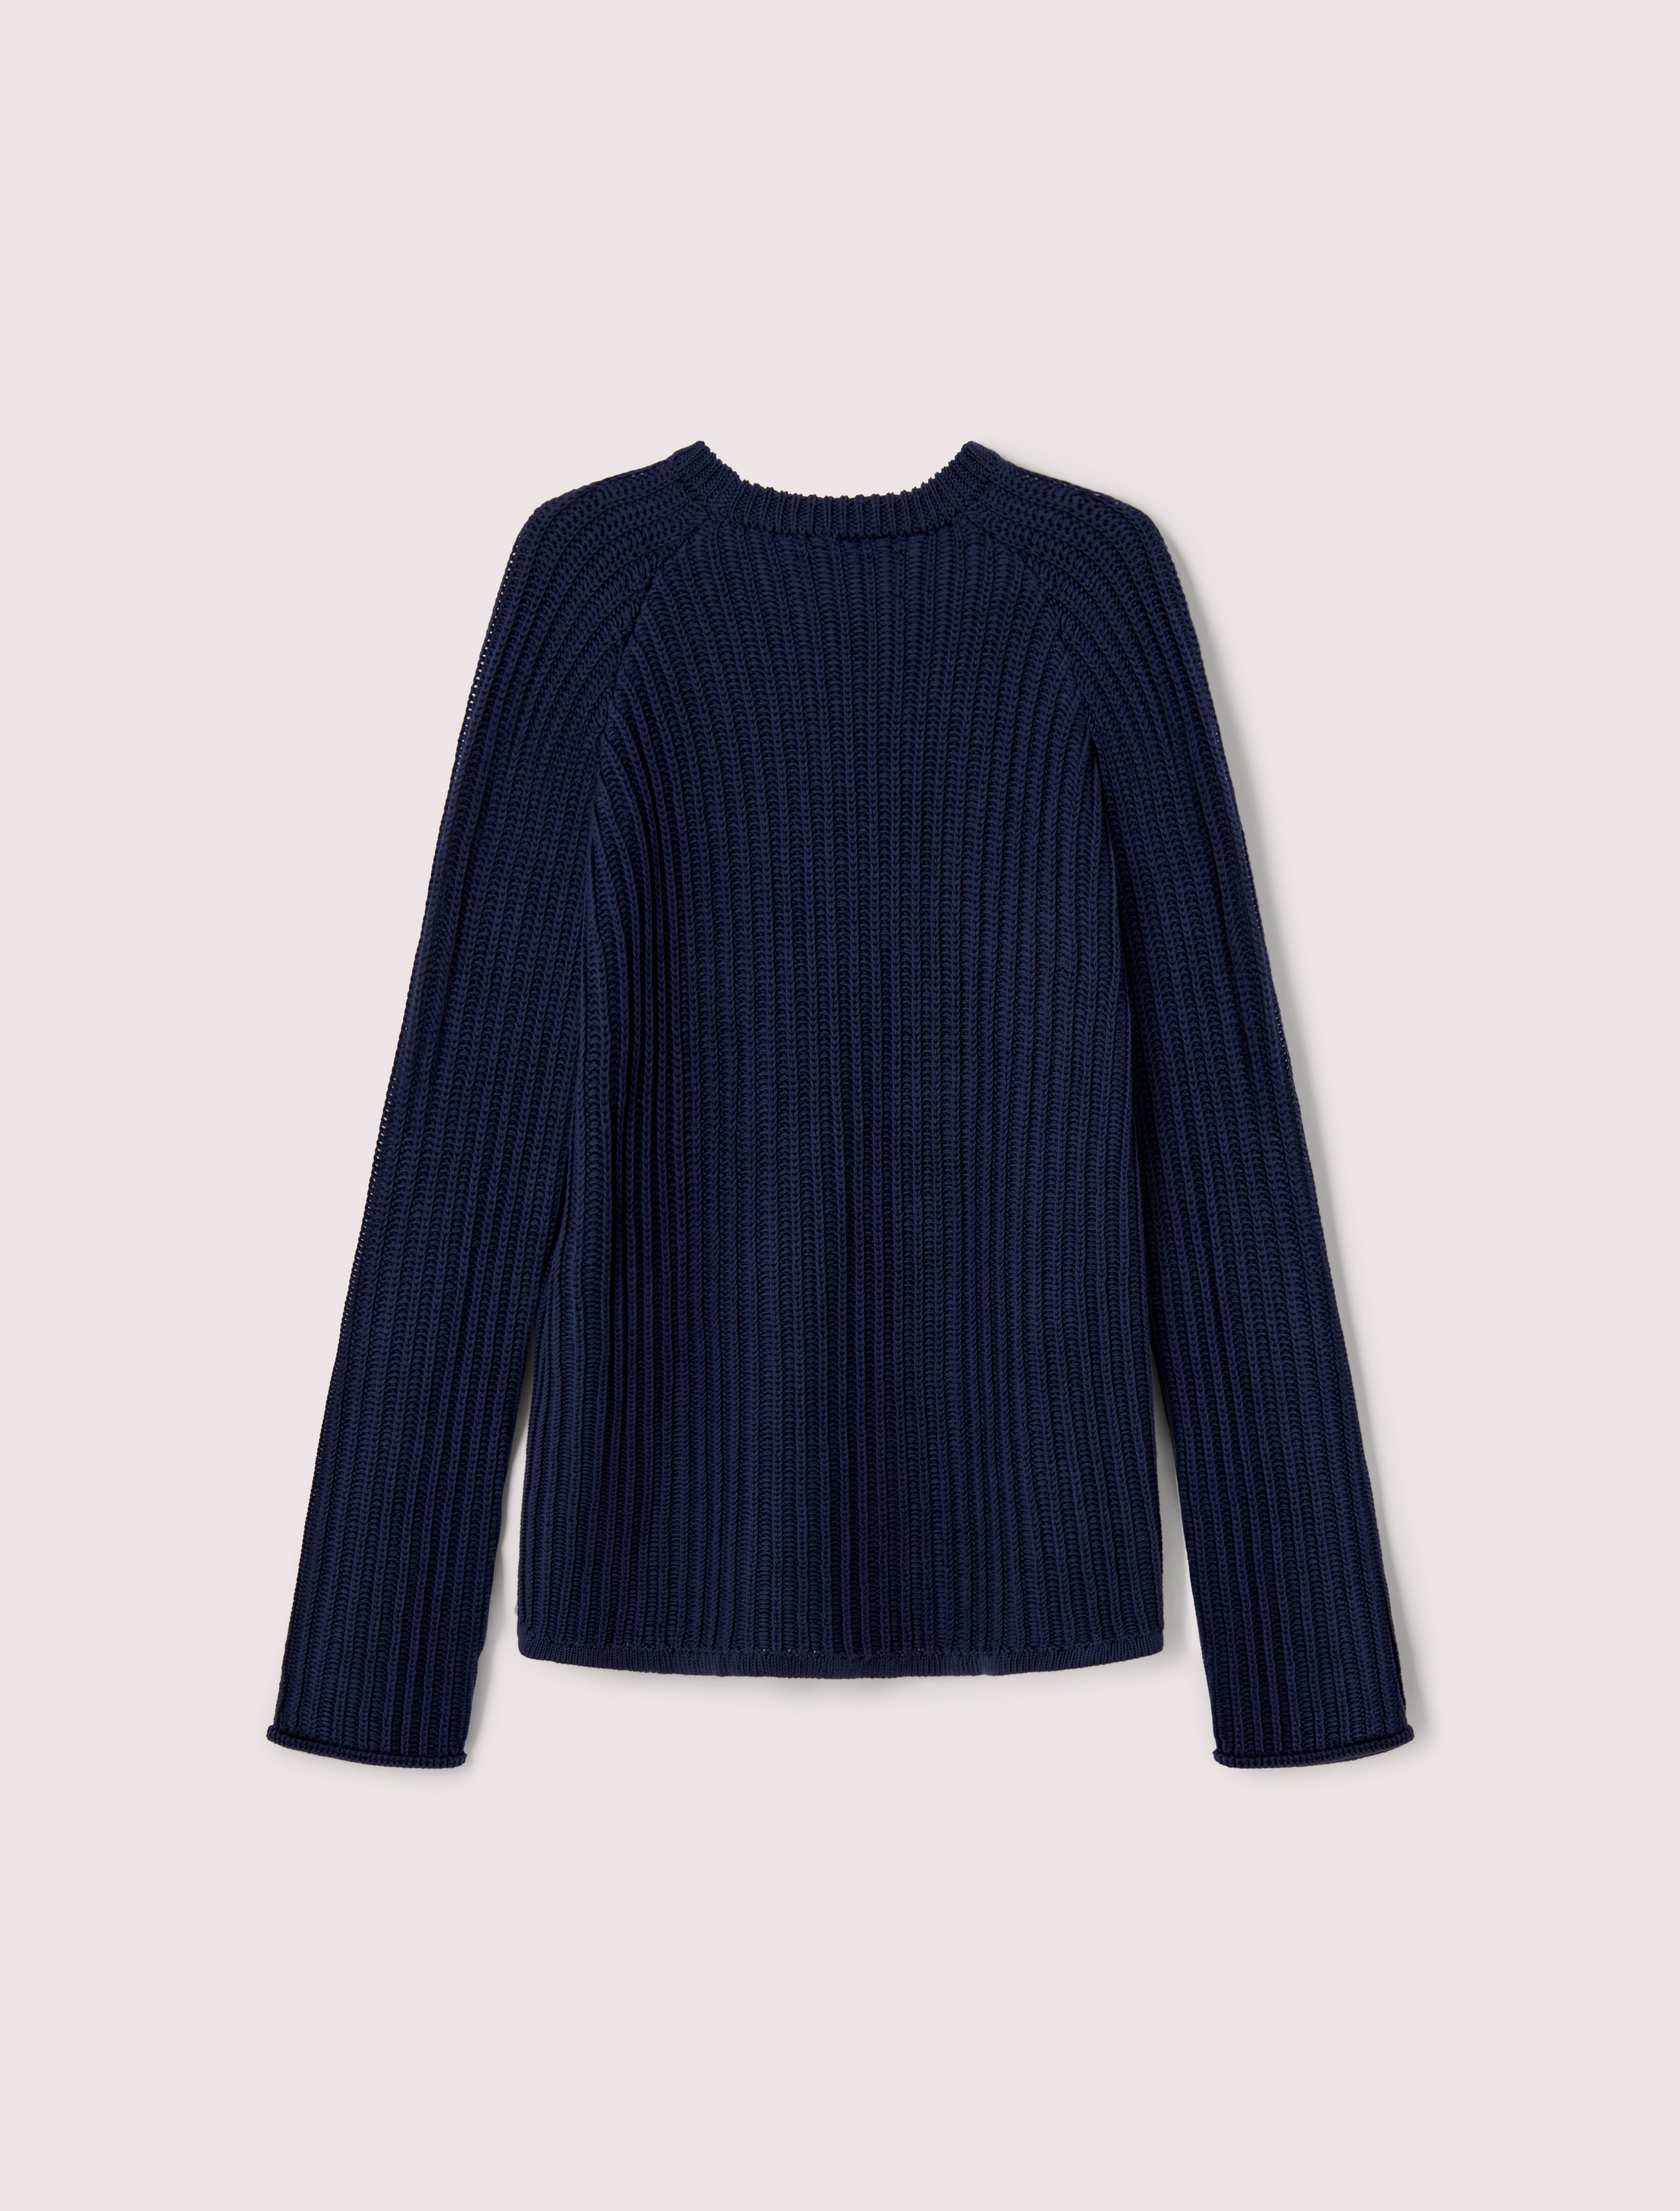 CARRER_ALBA KNITTED CREW NECK IN BLUE